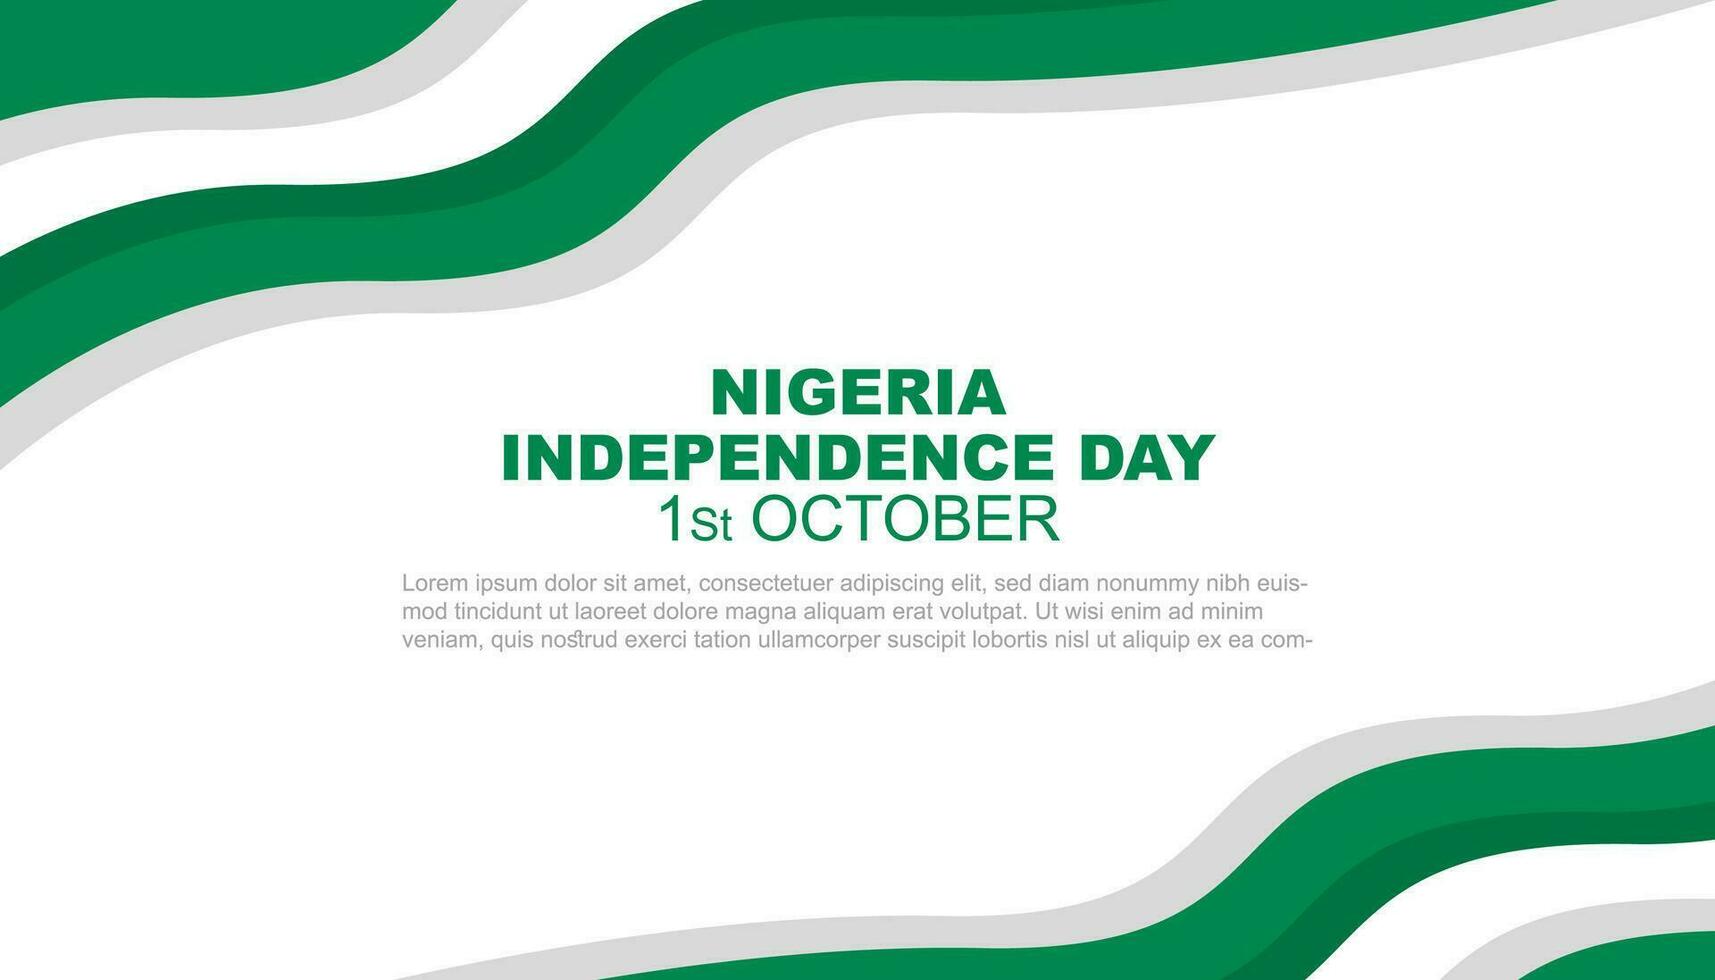 Nigeria independence day is celebrated on October 1. Background design template for Nigerian national holiday vector